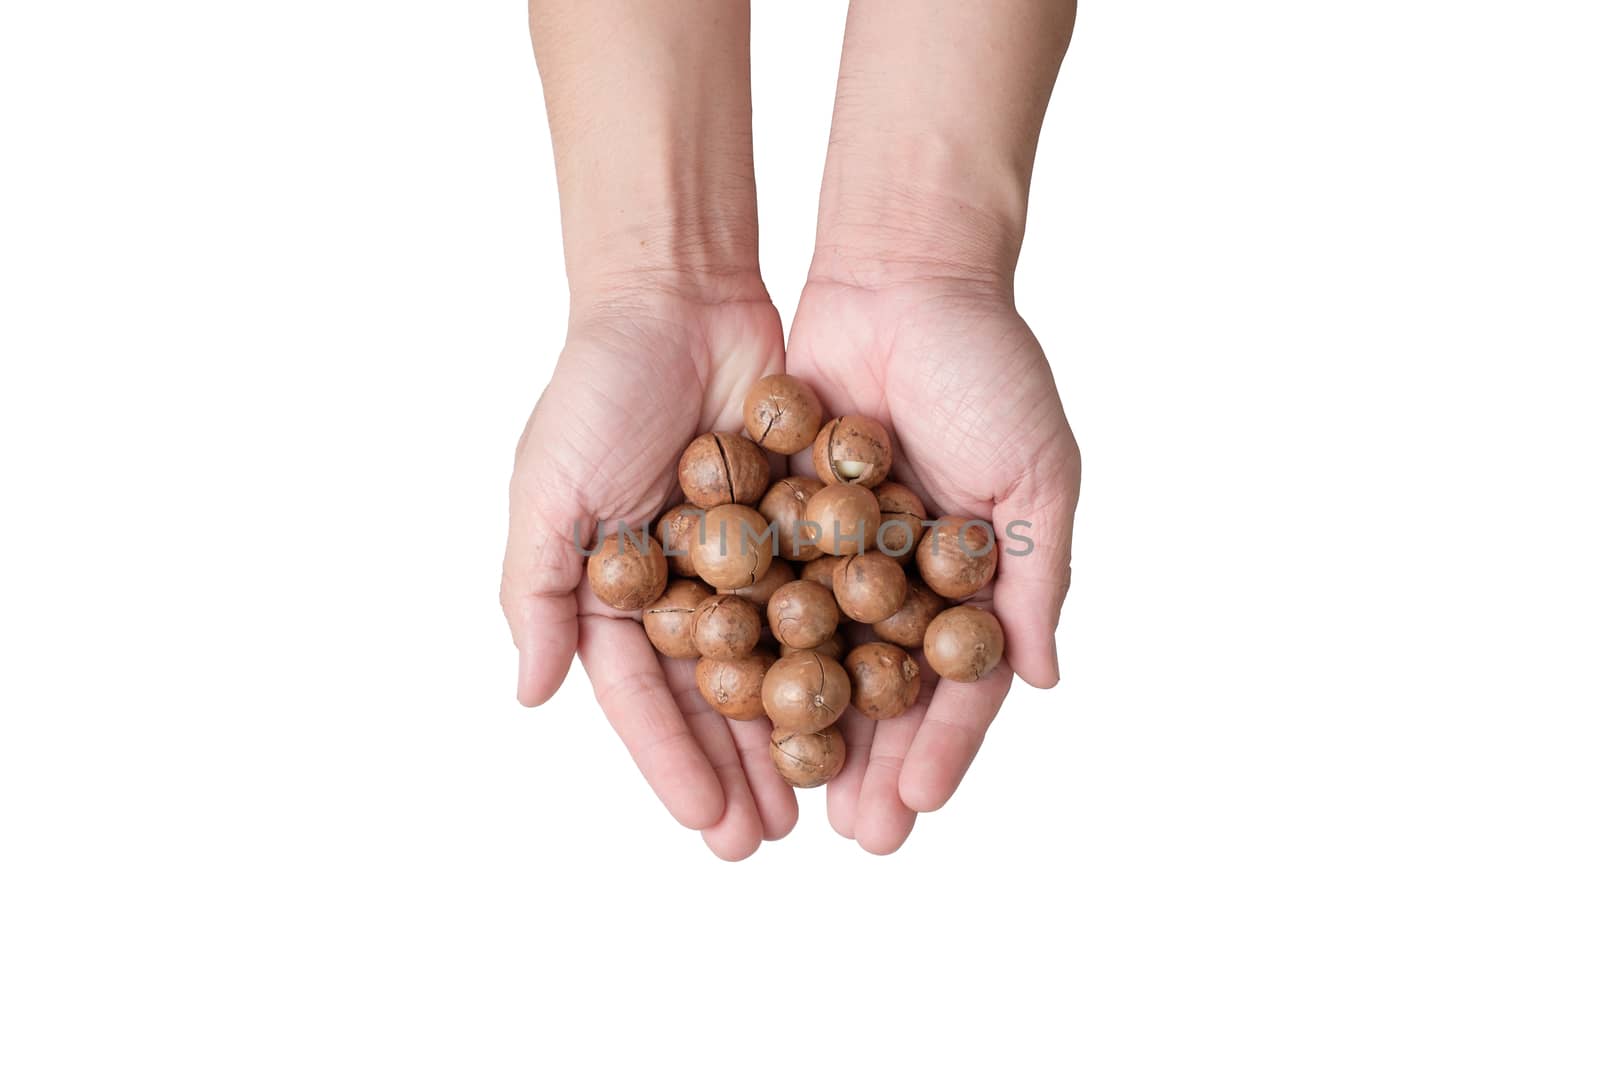 Hands holding macadamia nuts by zneb076